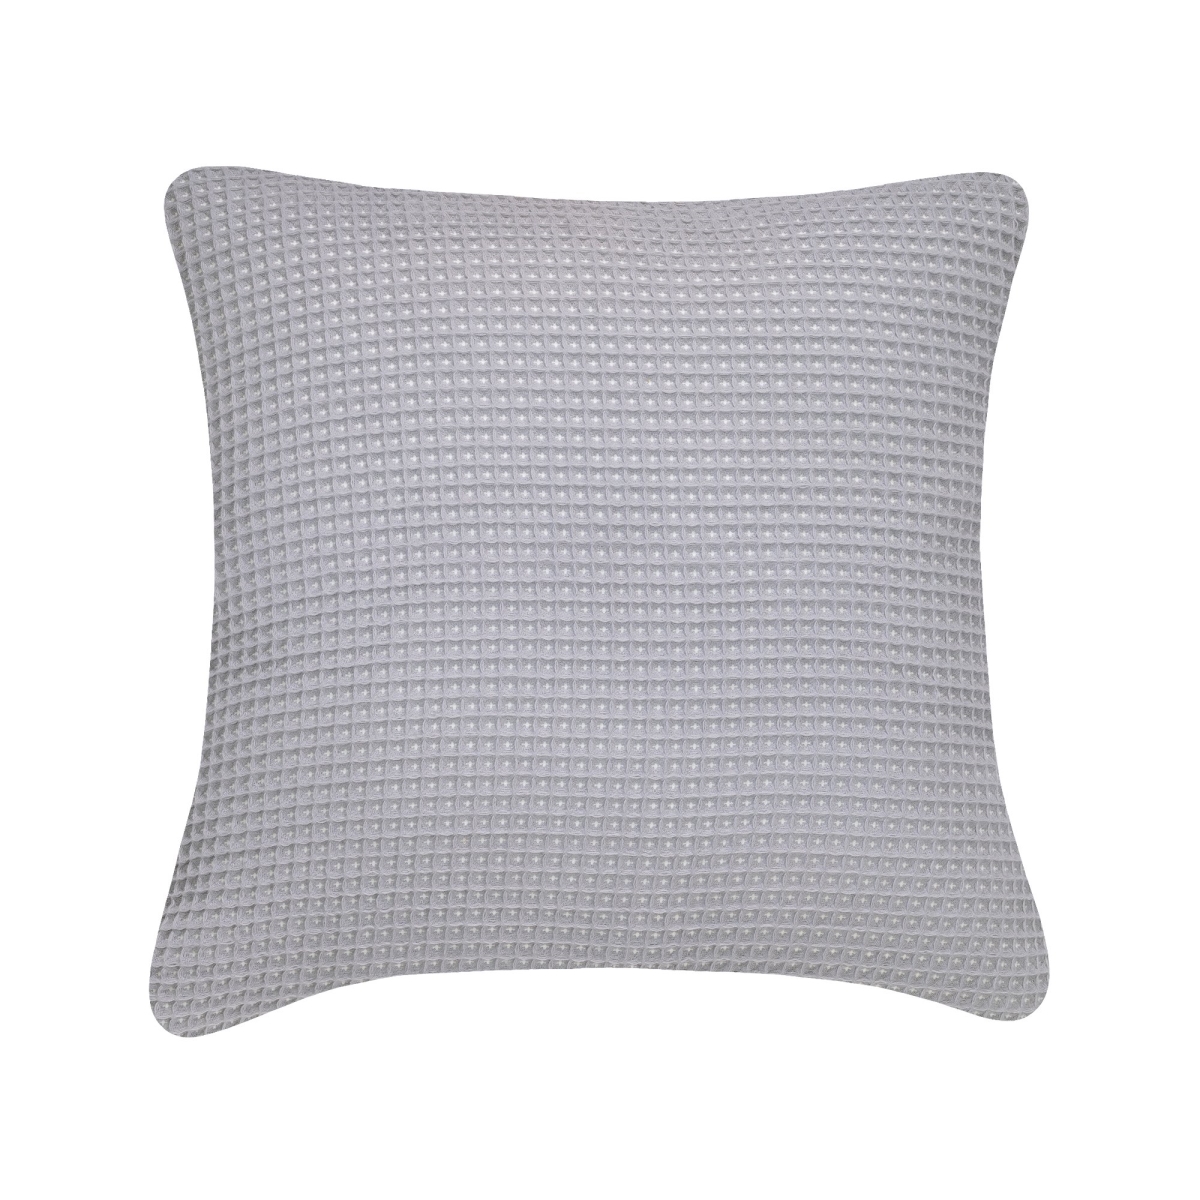 Sq-pi-fther-wafwg-2020 20 X 20 In. Waffle Decorative Cushion, White & Grey - 100 Percent Duck Feather